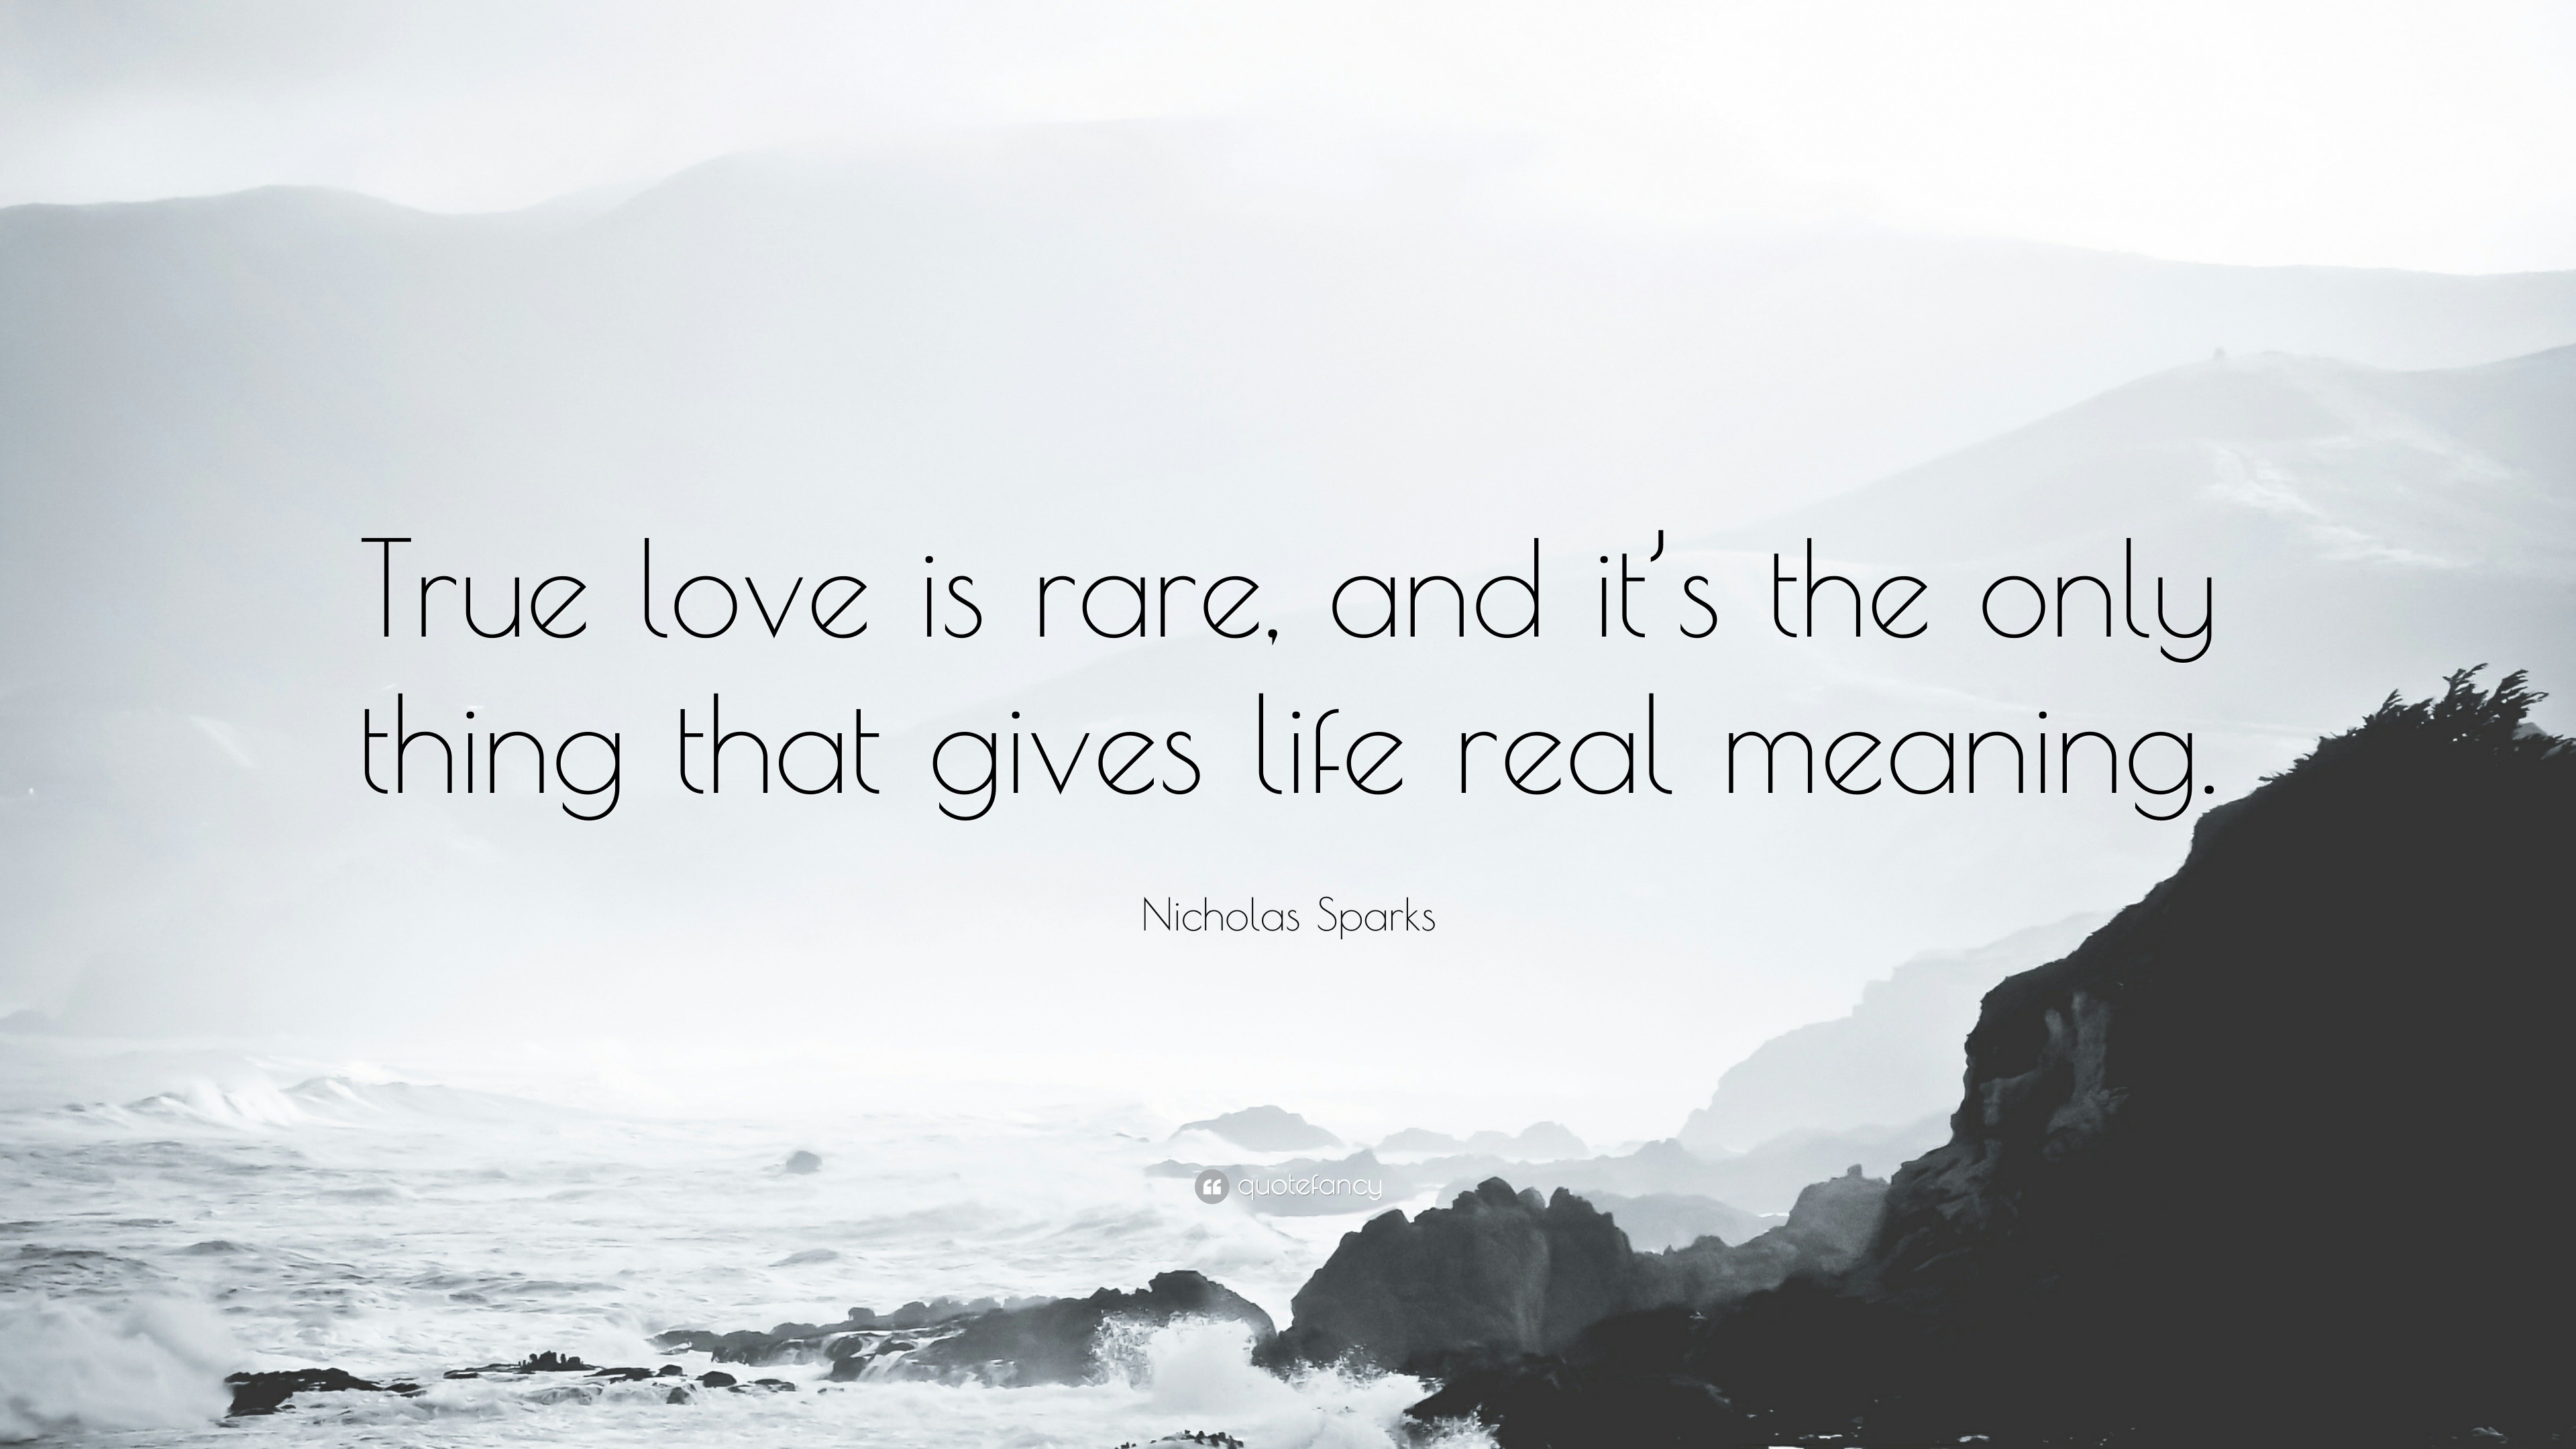 Nicholas Sparks Quote “True love is rare and it s the only thing that